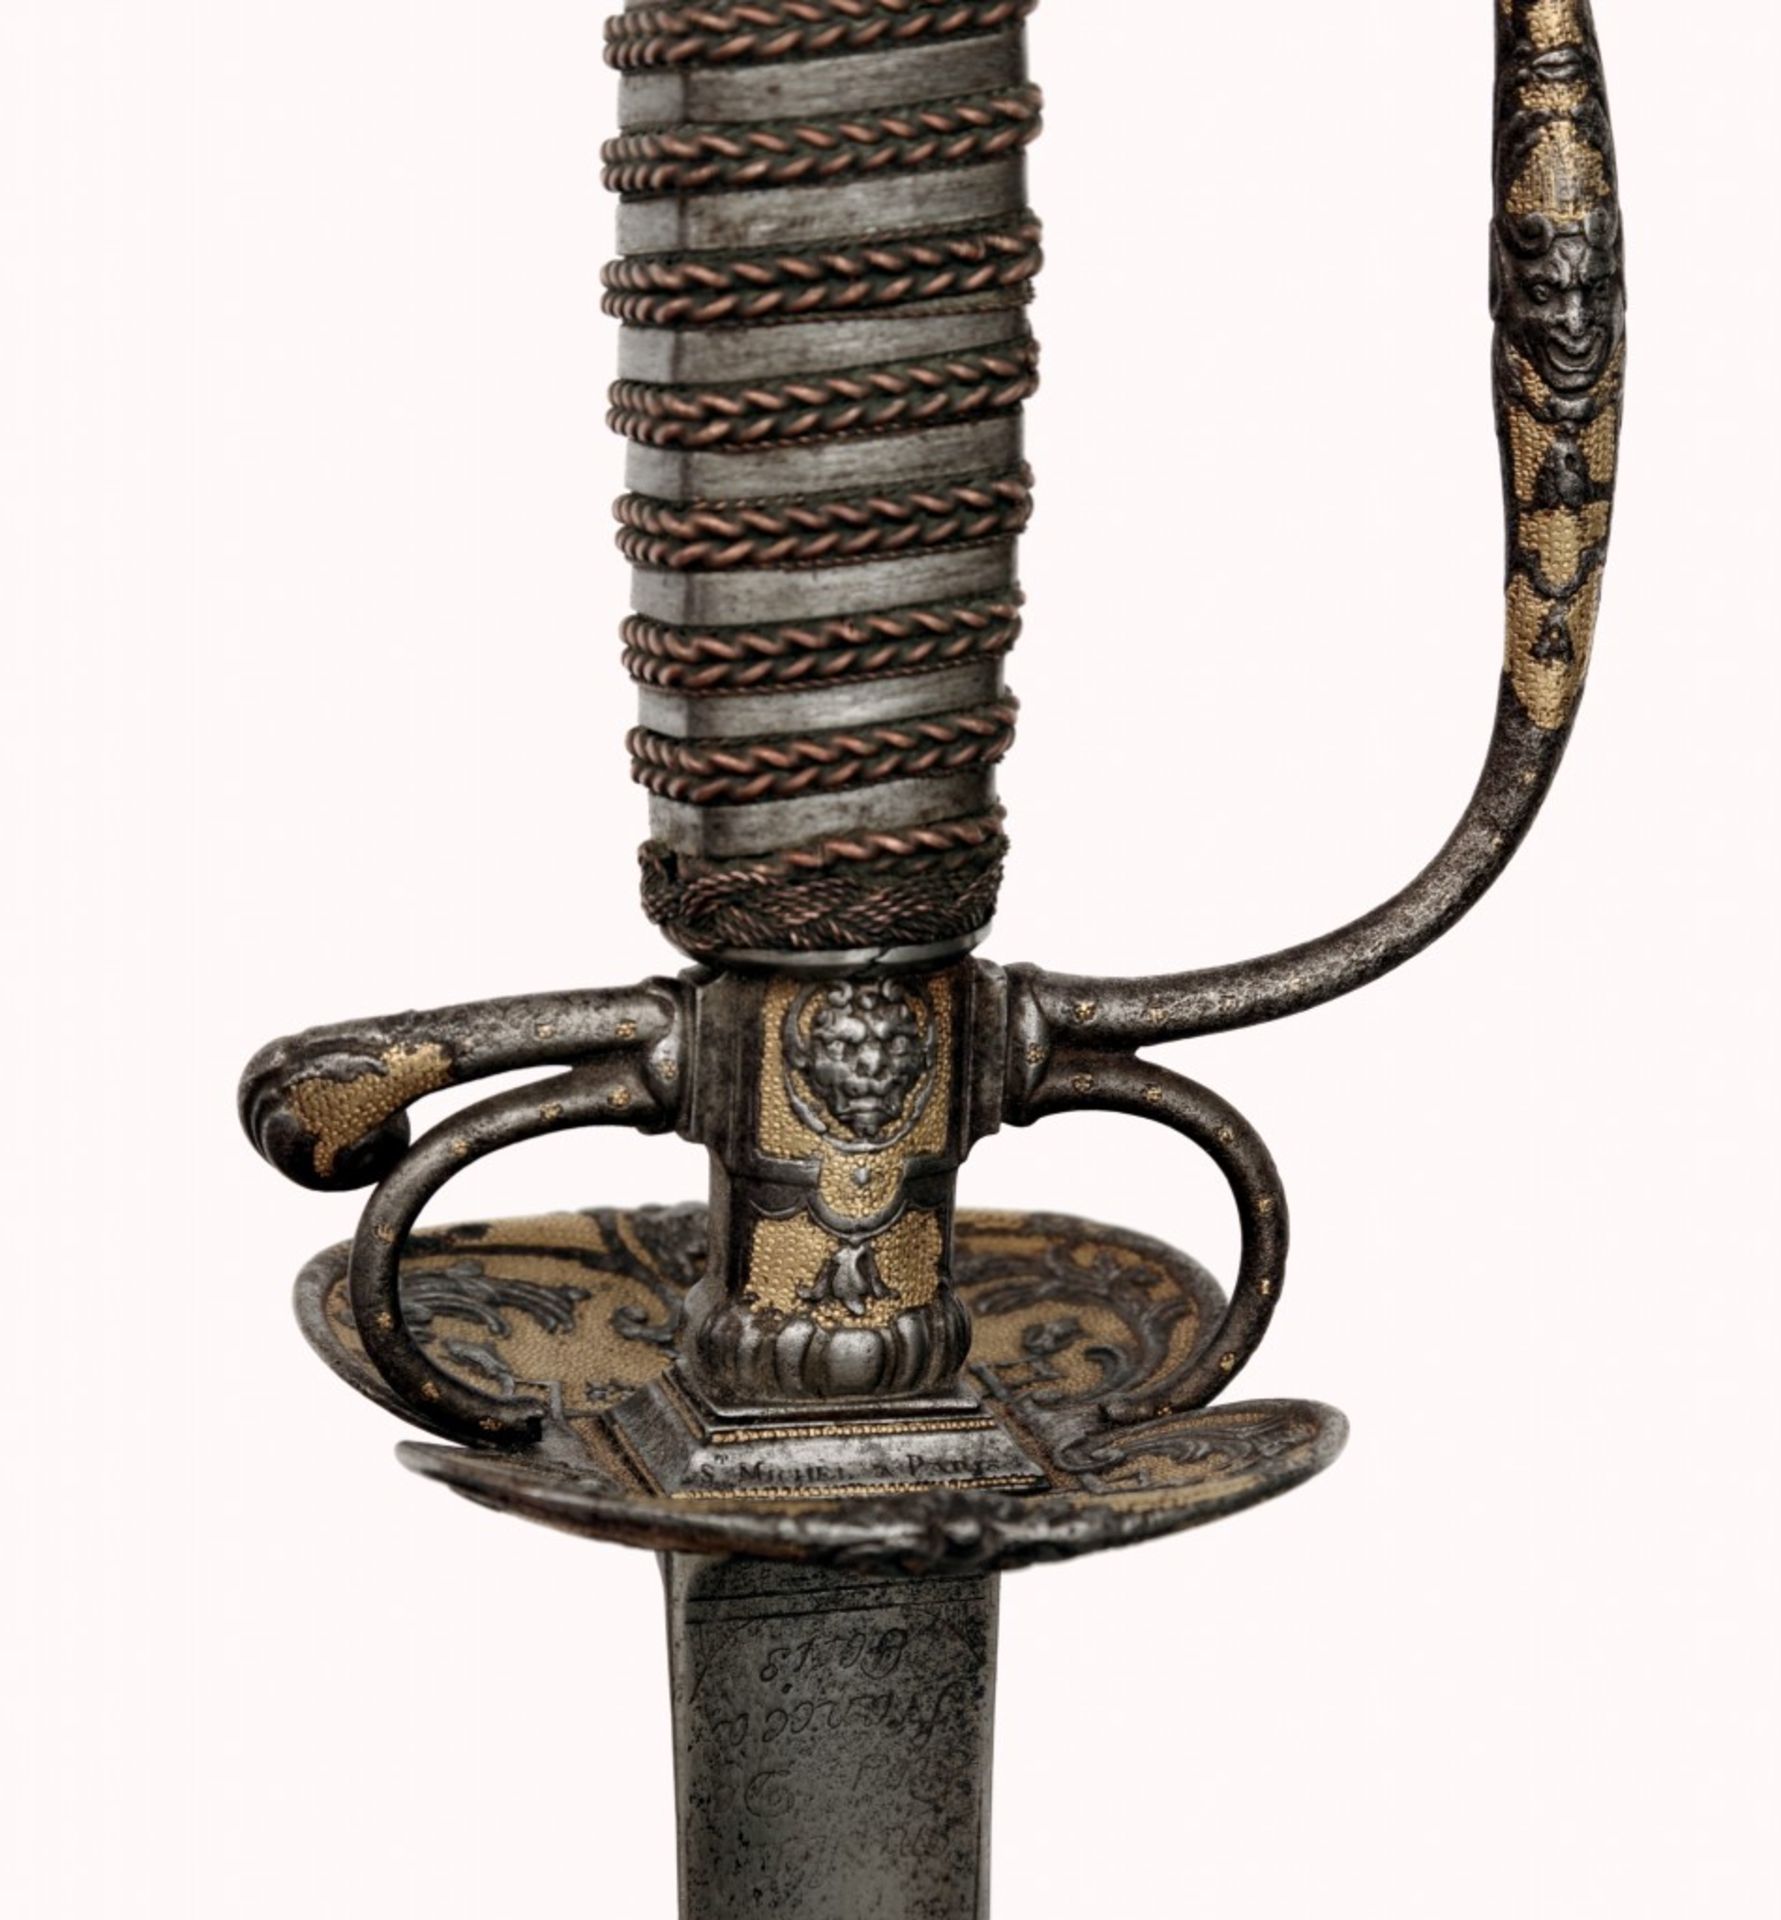 A French Gilt Small-sword with Chiselled Hilt by Jean Louis Guyon the Elder - Image 6 of 11